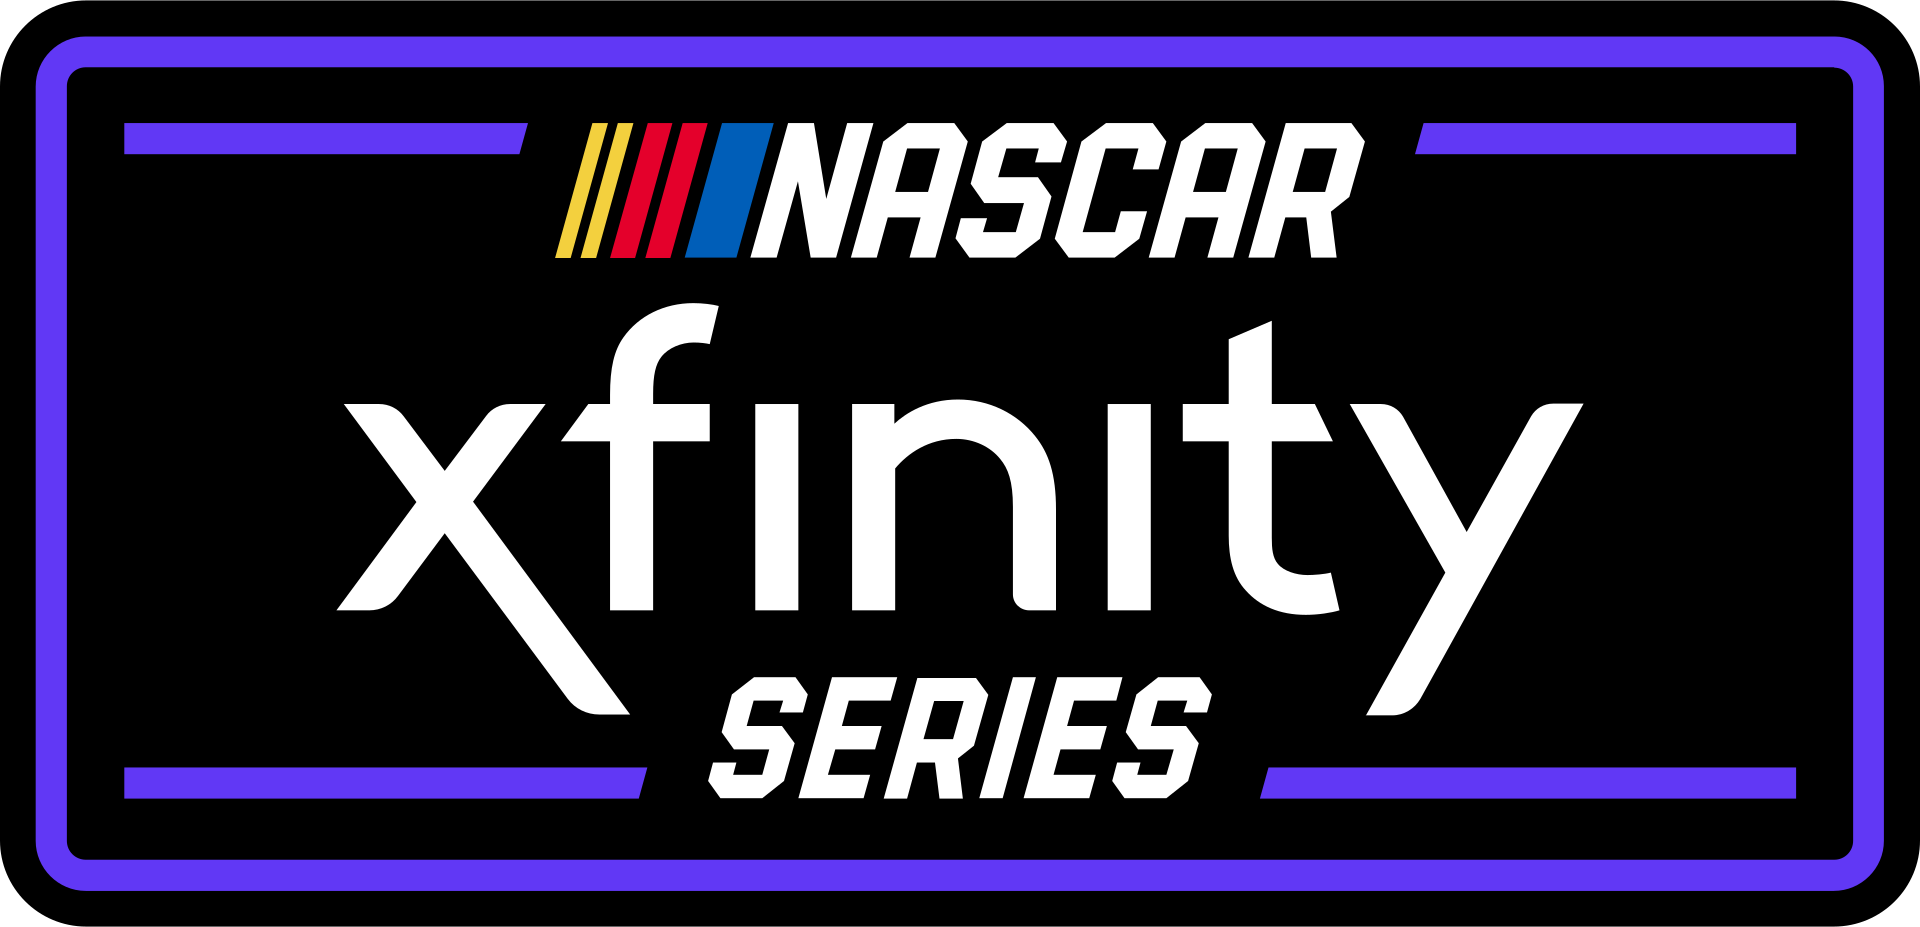 The CW to Broadcast All NASCAR Xfinity Series Races Starting in 2025 Tireball Sports